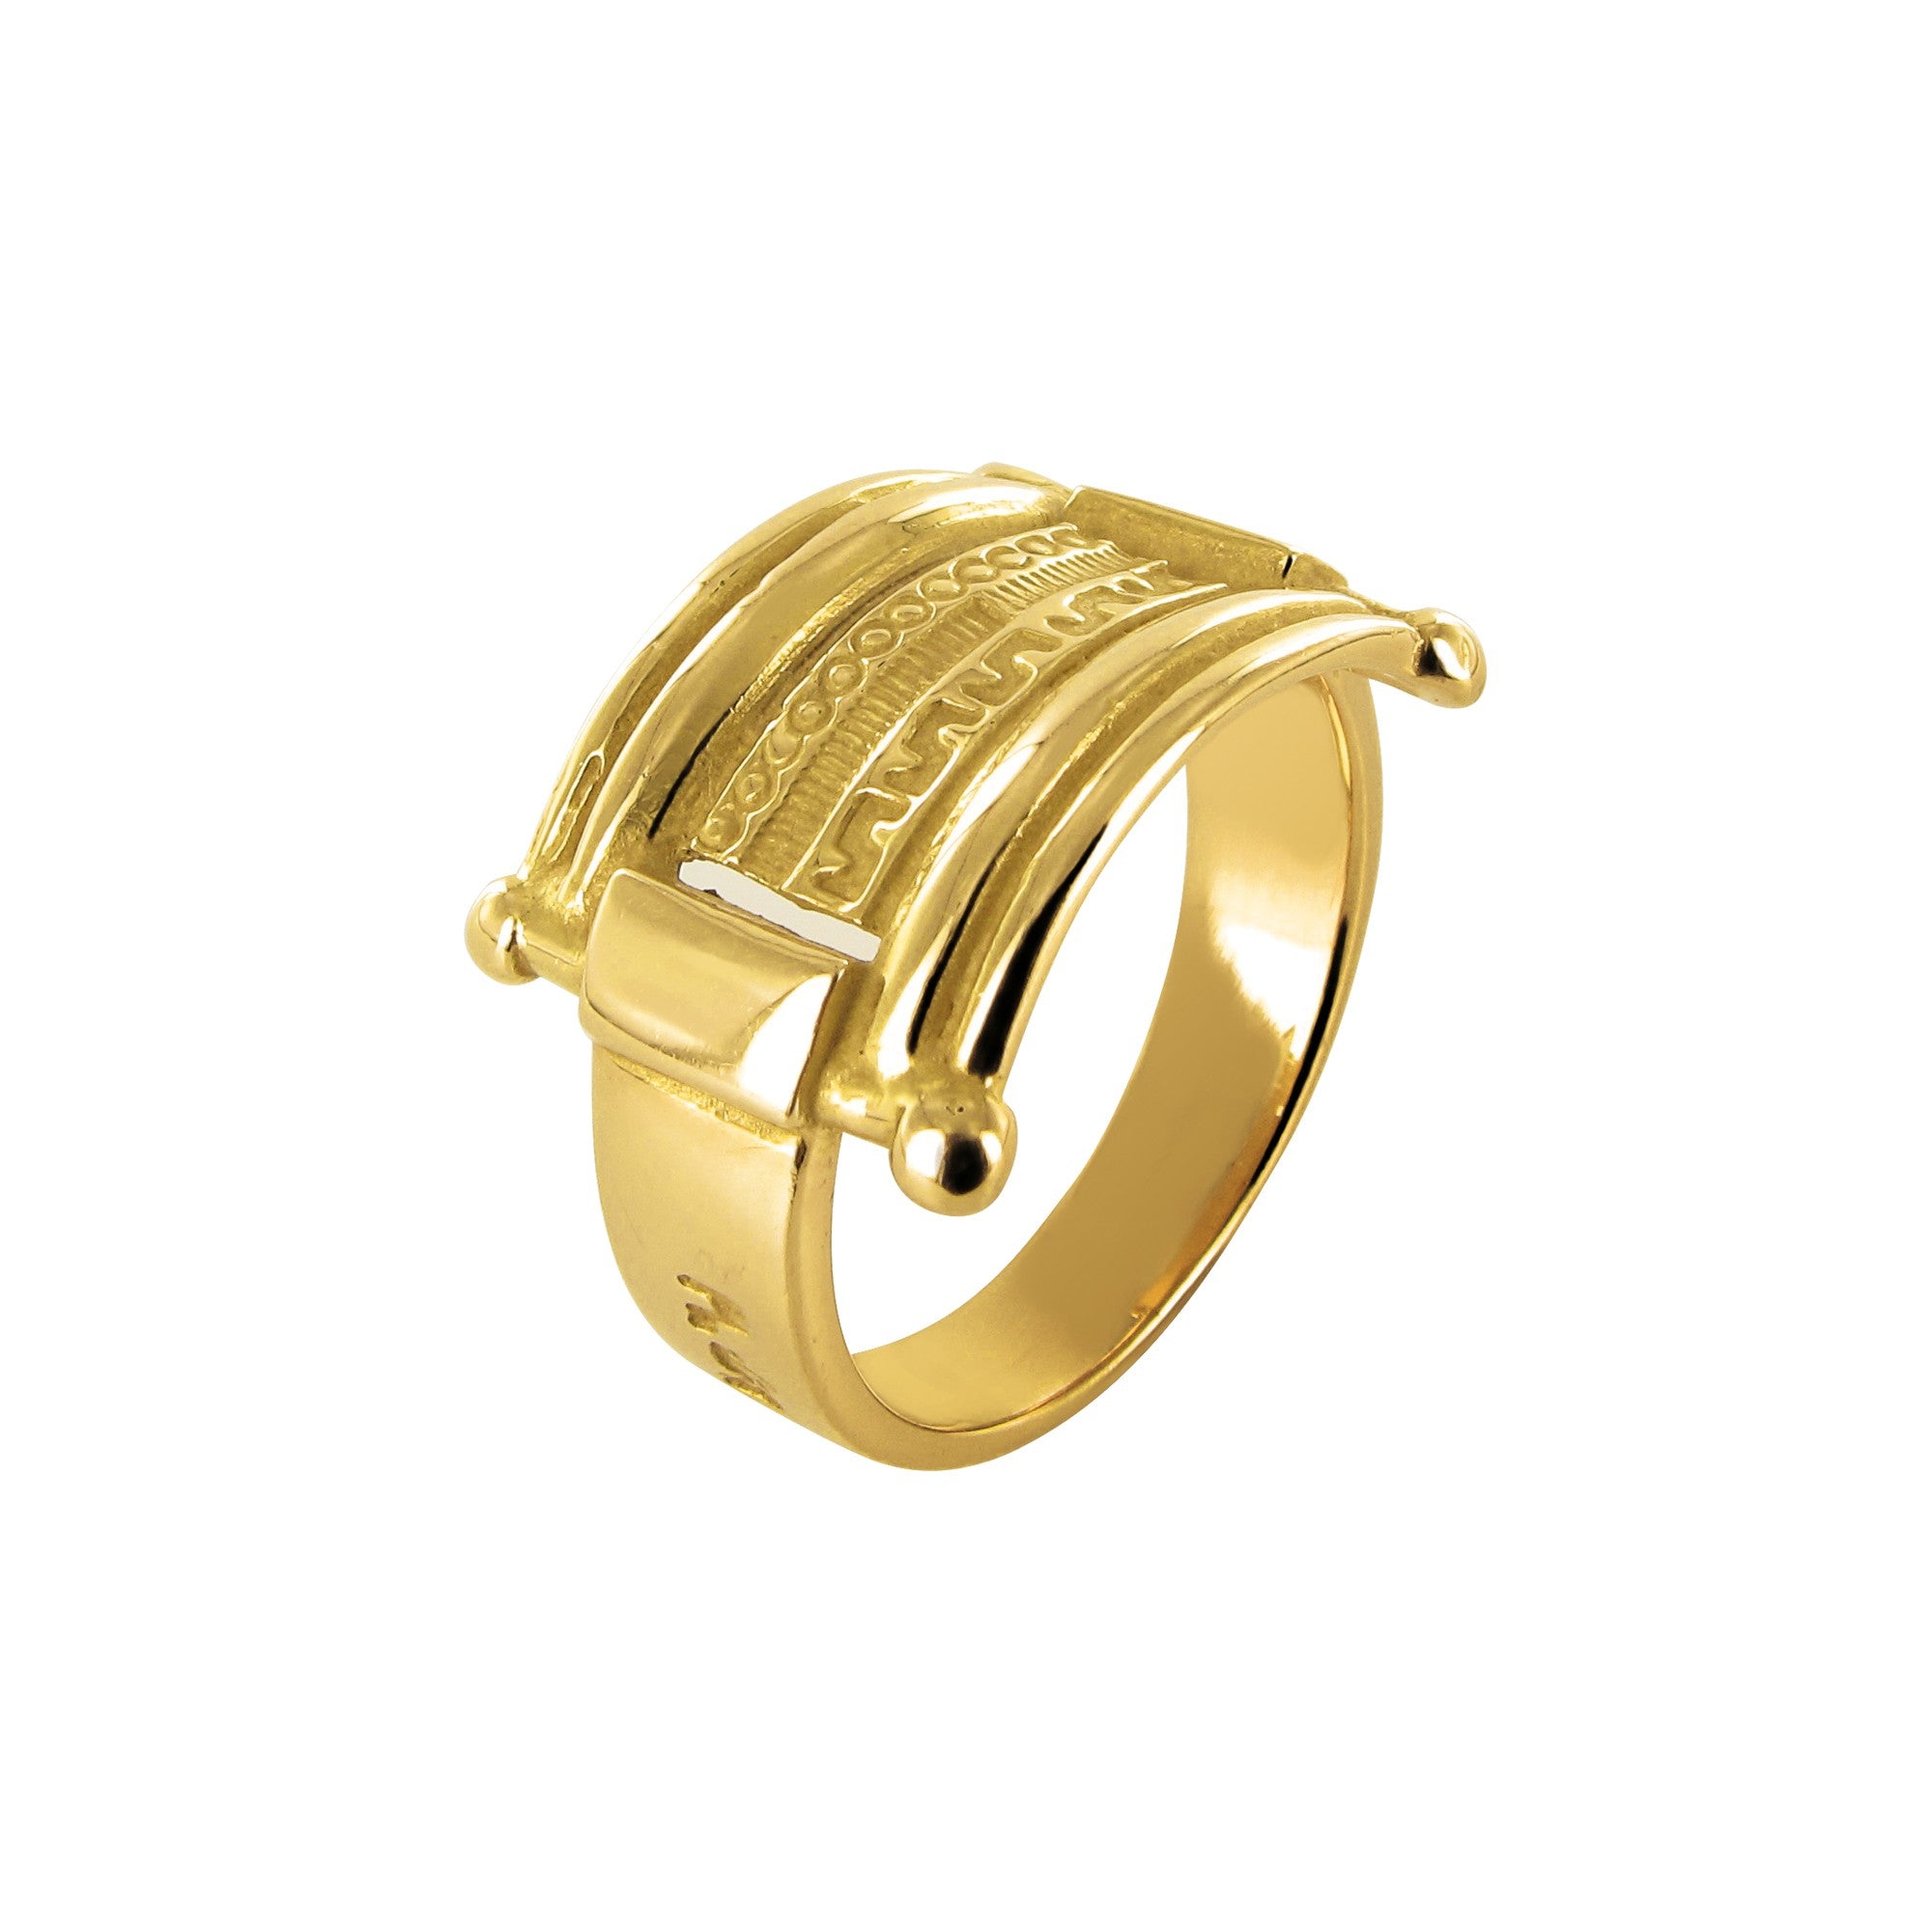 Greek gold ring Tournaire – Philippe Tournaire